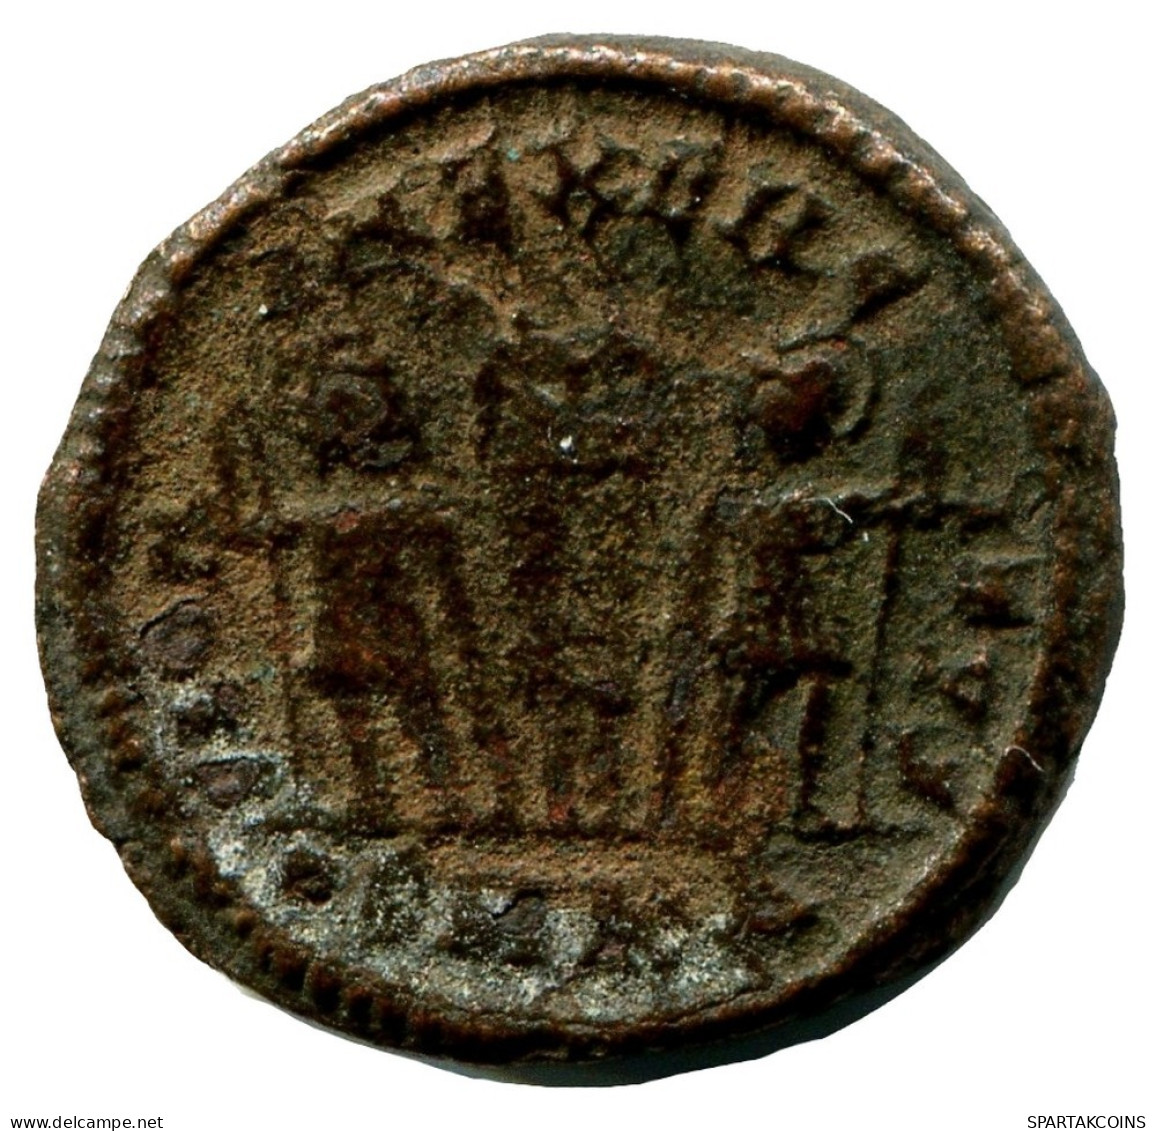 CONSTANTINE I MINTED IN CYZICUS FROM THE ROYAL ONTARIO MUSEUM #ANC11017.14.U.A - The Christian Empire (307 AD Tot 363 AD)